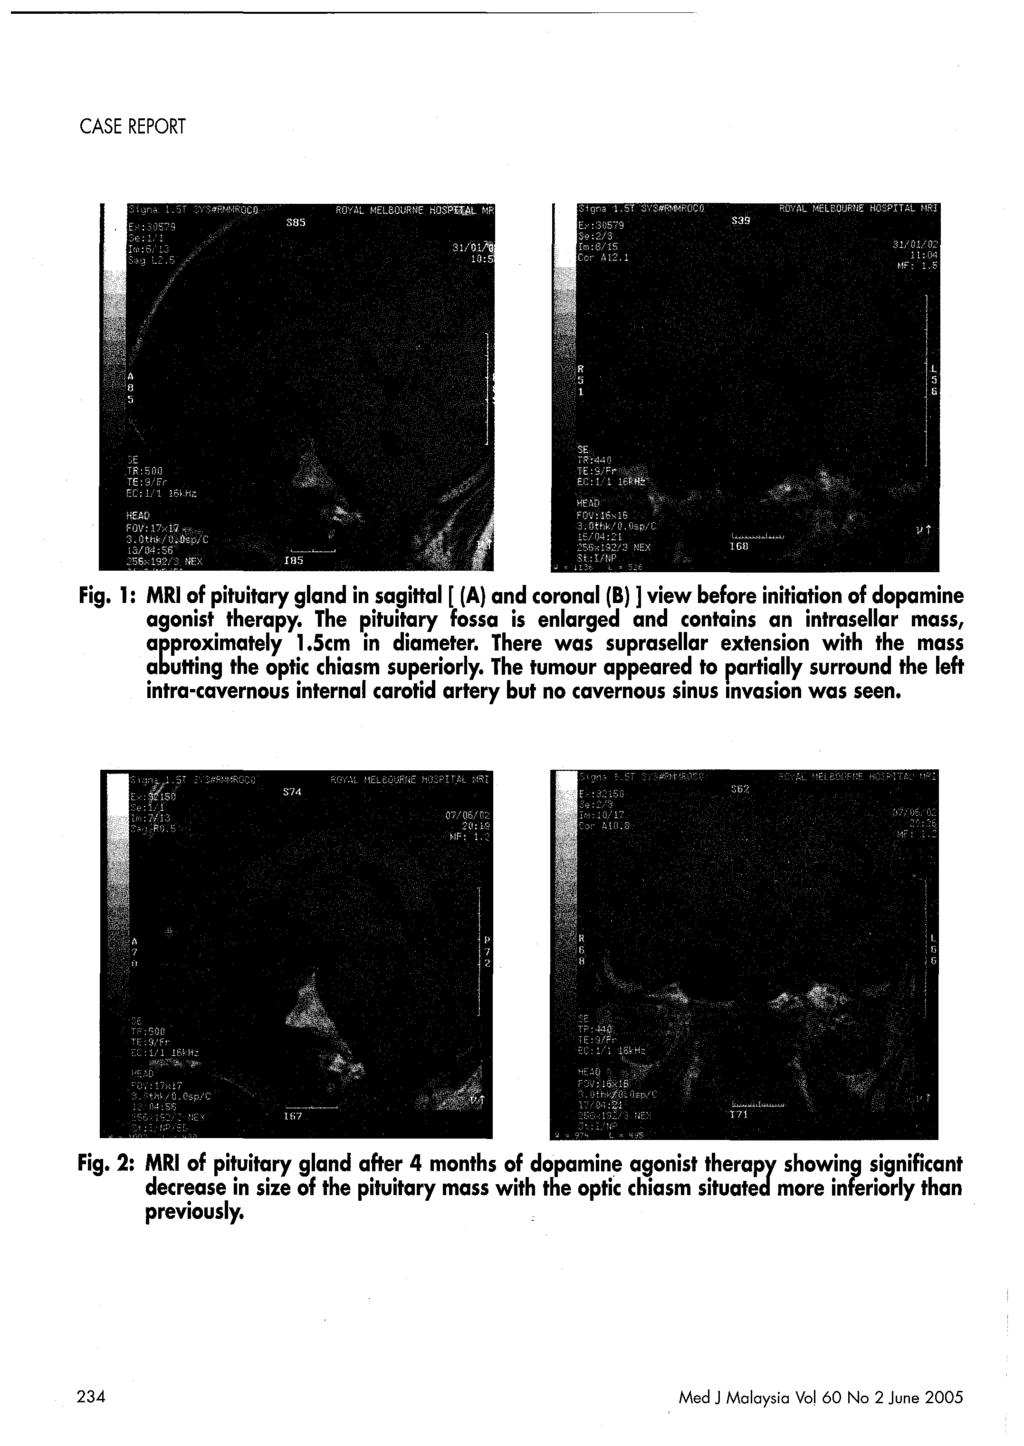 Fig. 1: MRI of pituitary gland in sagittal [ (A) and coronal (B) ] view before initiation of dopamine agonist therapy.